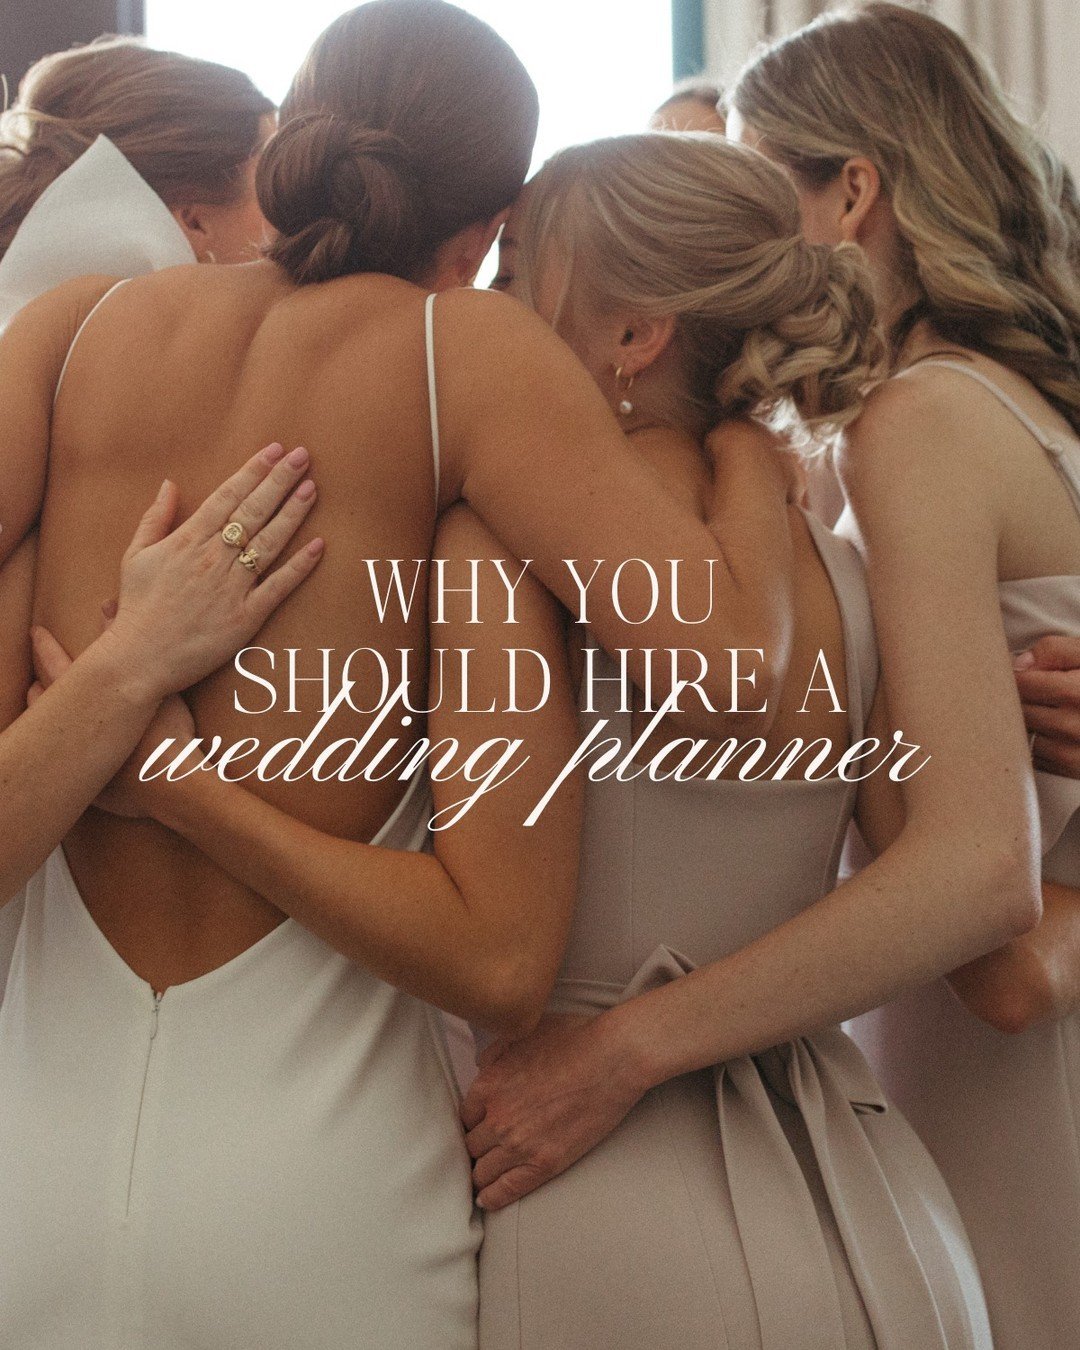 Swipe to read why hiring a wedding planner is one of the best decisions you could make when it comes to your wedding day 👉⁠
⁠
SO many details go into planning any affair - from selecting the best creative partners for your celebration to nailing dow